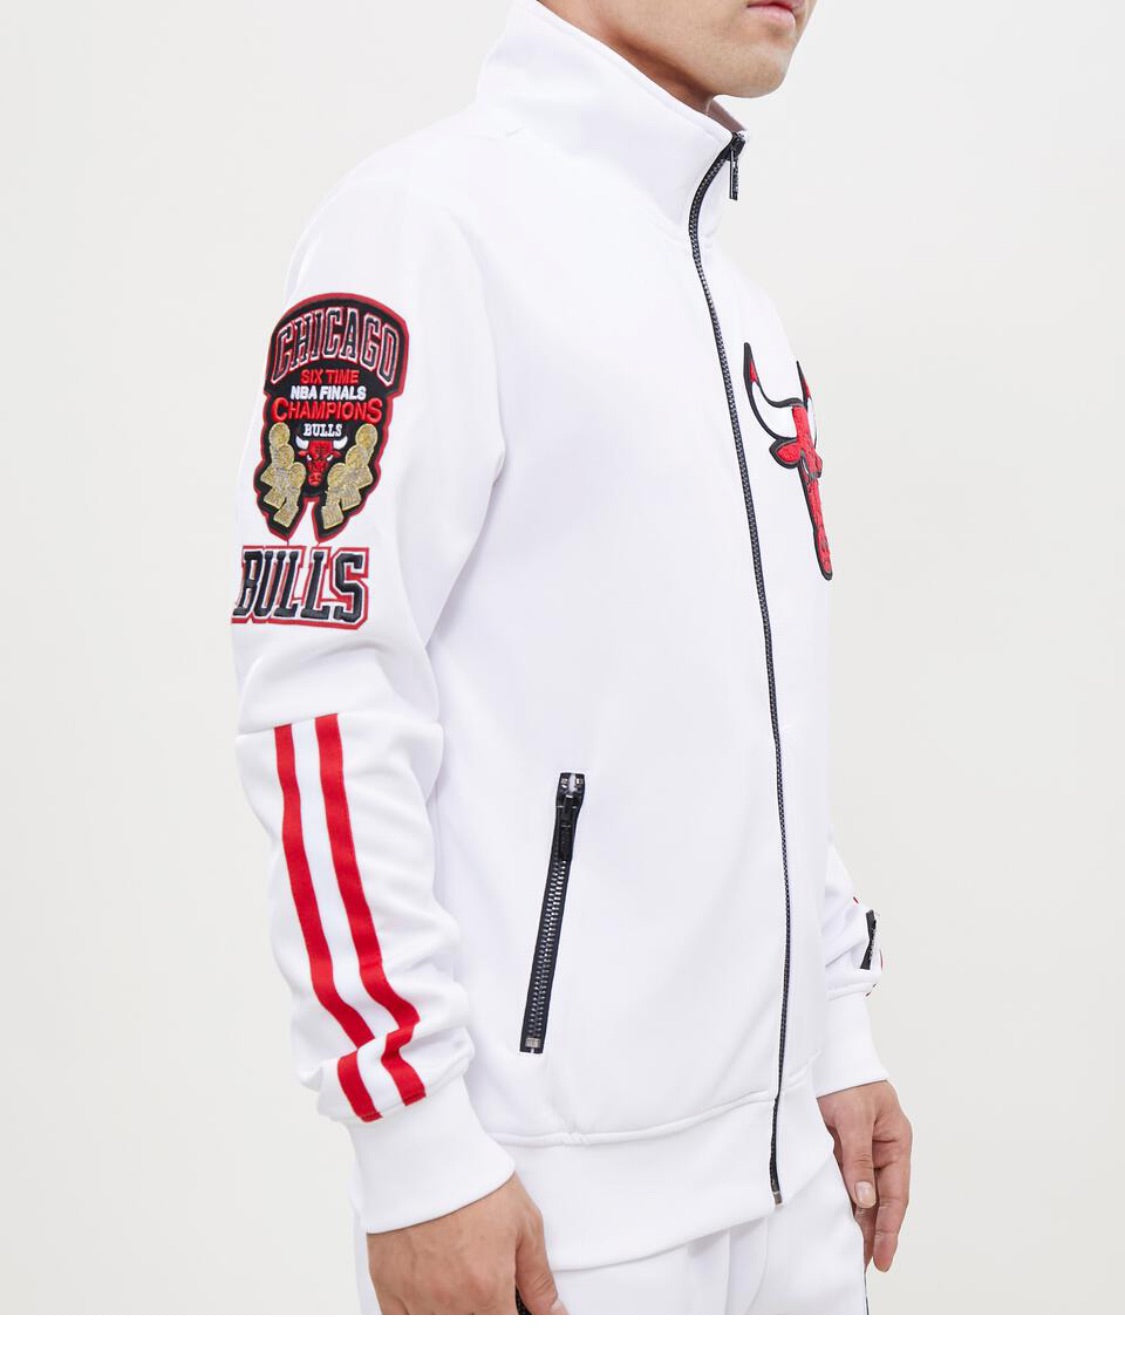 Women's Chicago Bulls Raised Tracksuit Set 3116 - Fashionistanbul -  Wholesale Clothing From the Factory